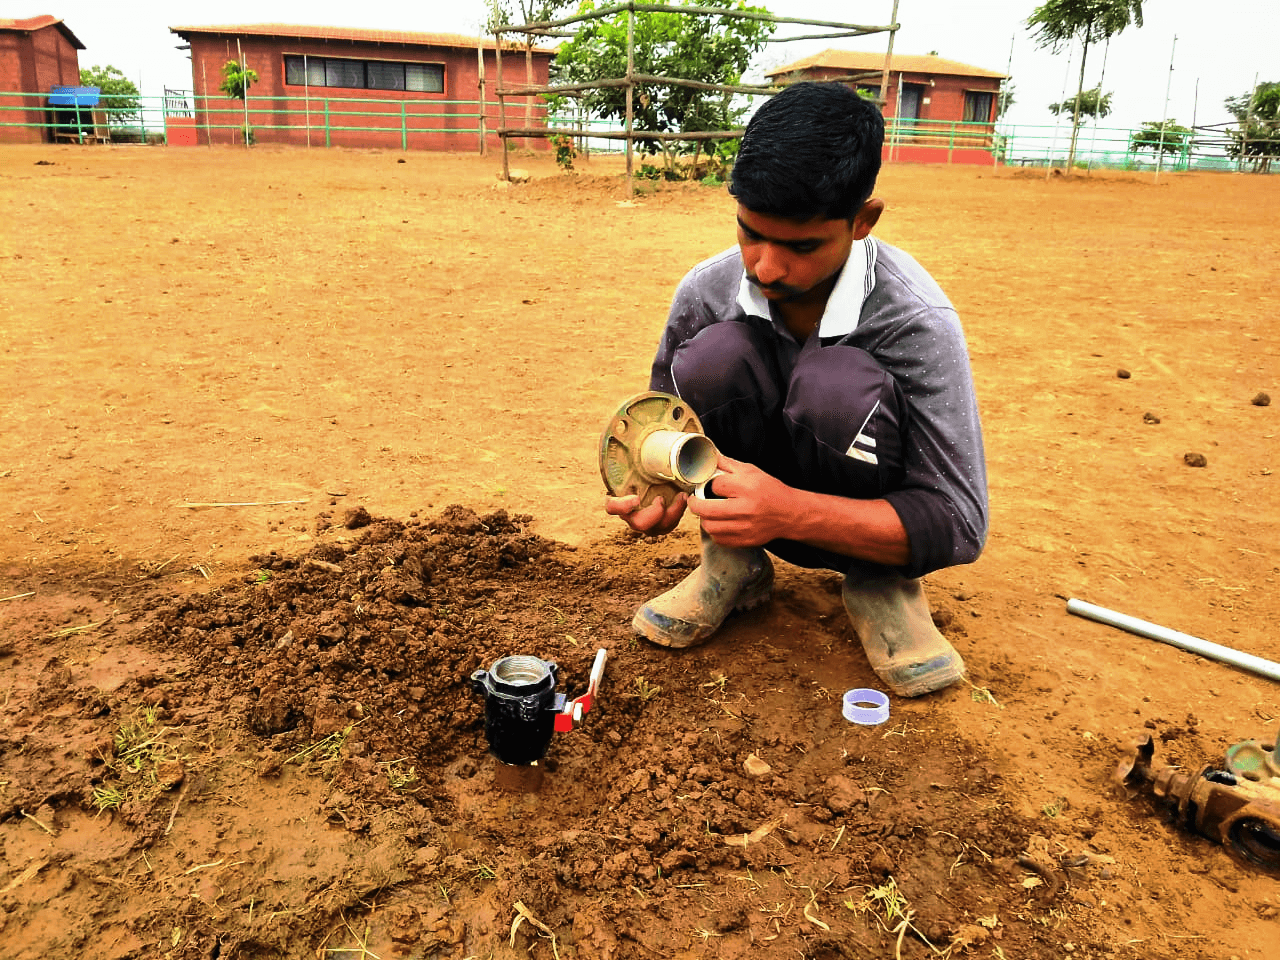 An Animal Rahat sanctuary staff member repairs the irrigation system.